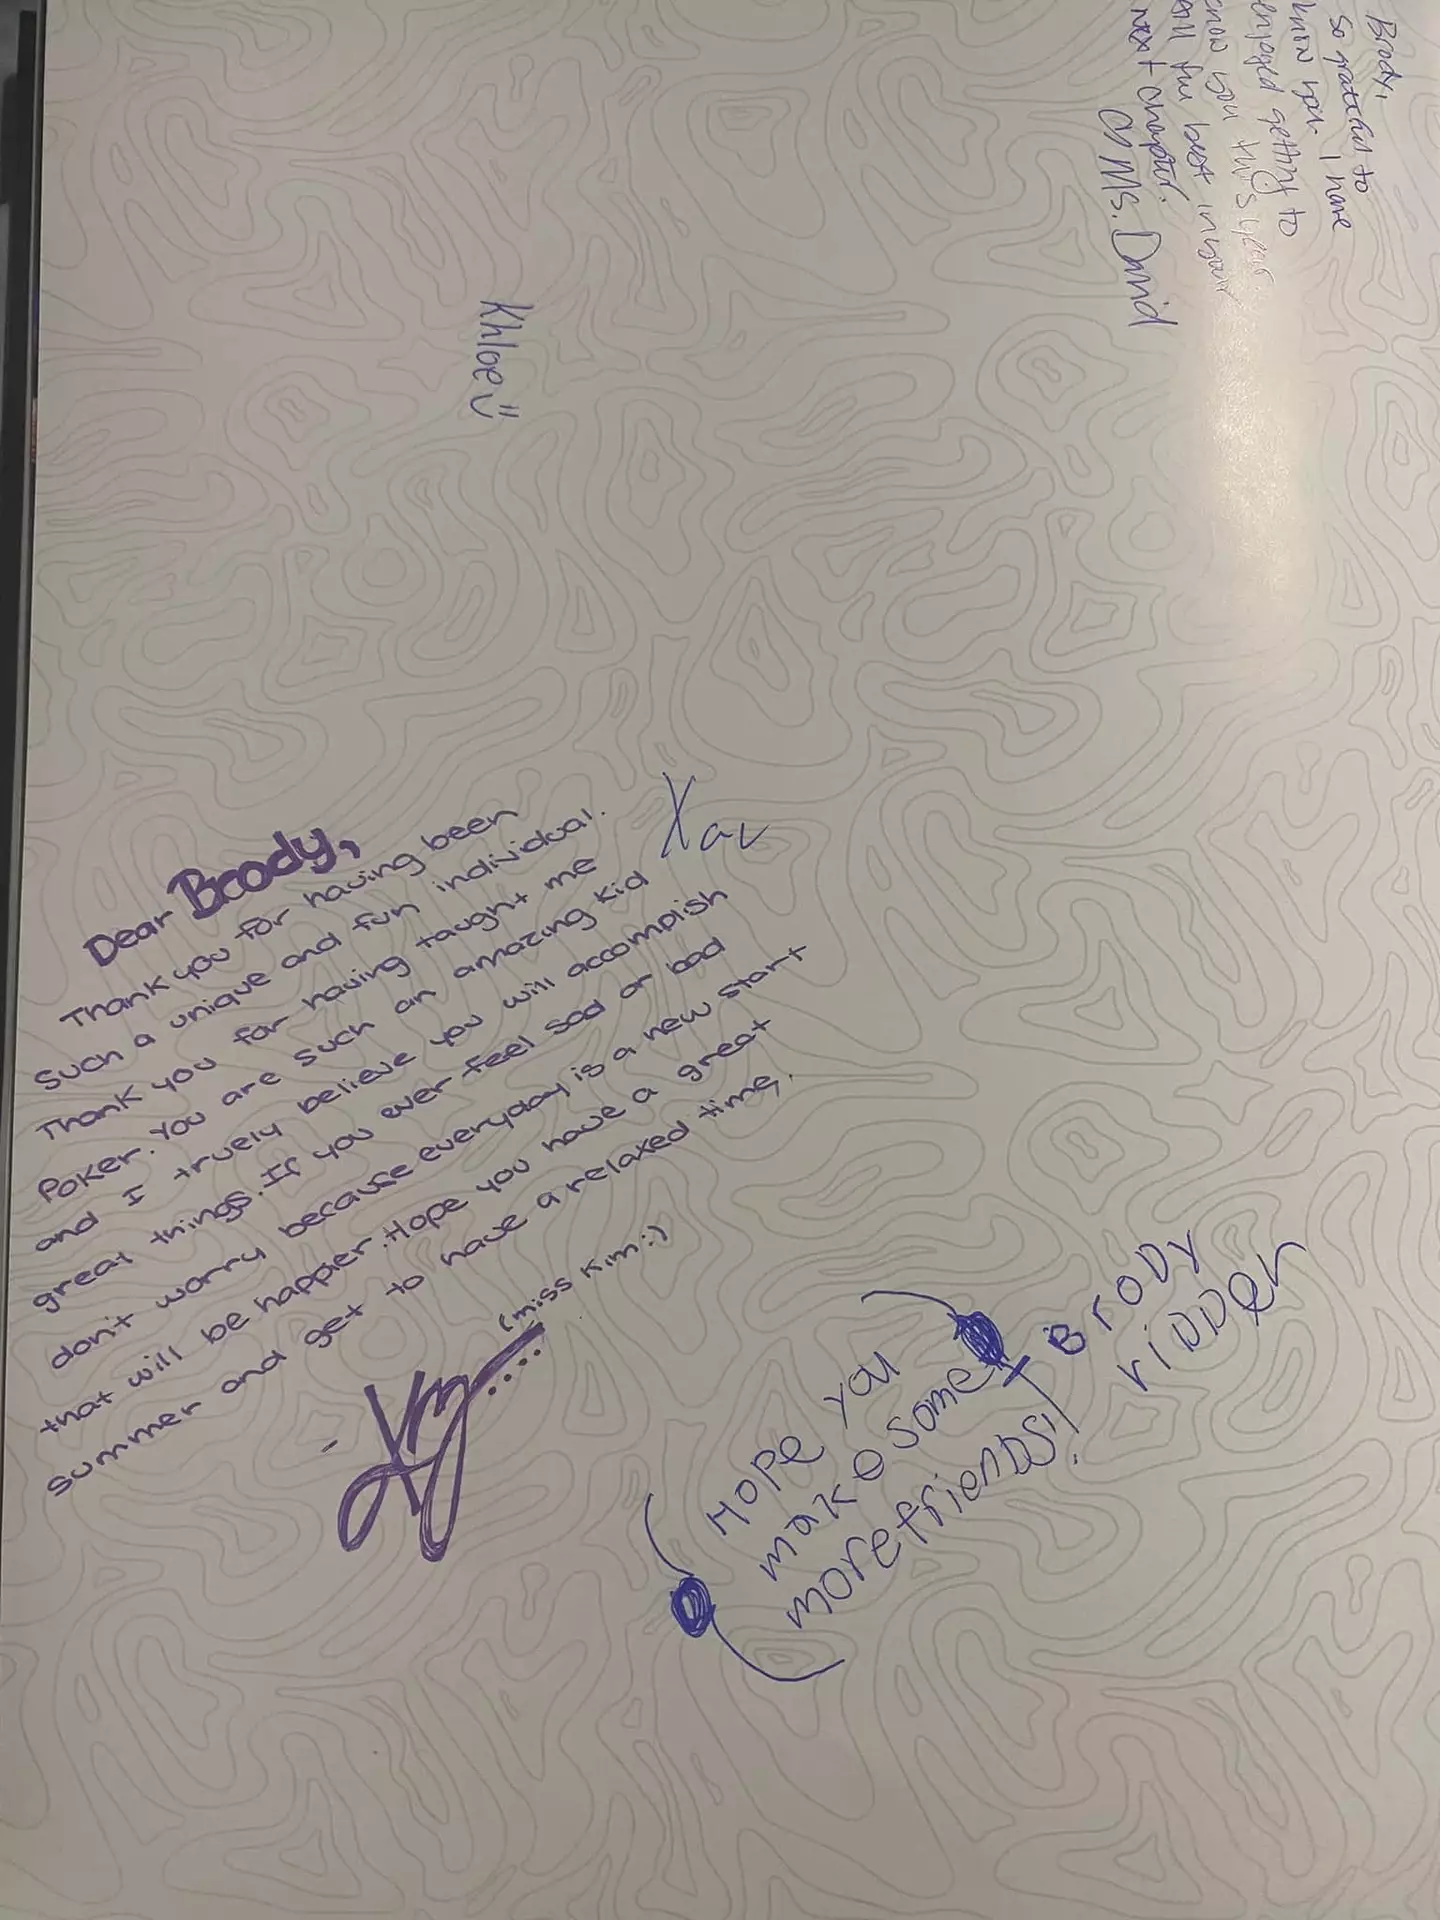 Brody's classmates refused to sign his yearbook.